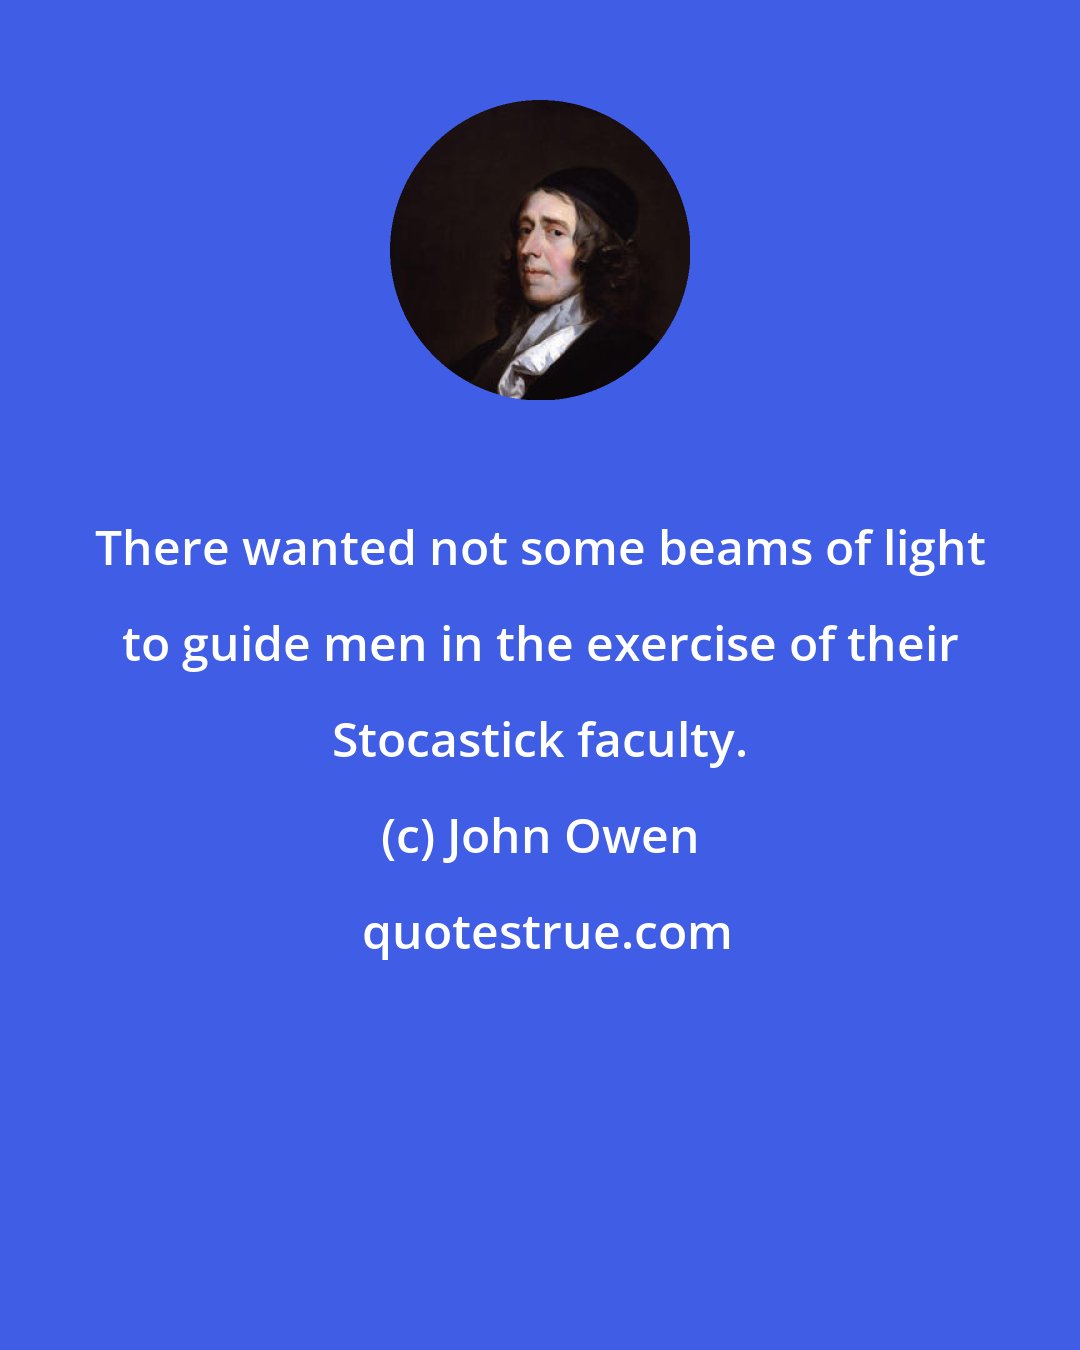 John Owen: There wanted not some beams of light to guide men in the exercise of their Stocastick faculty.